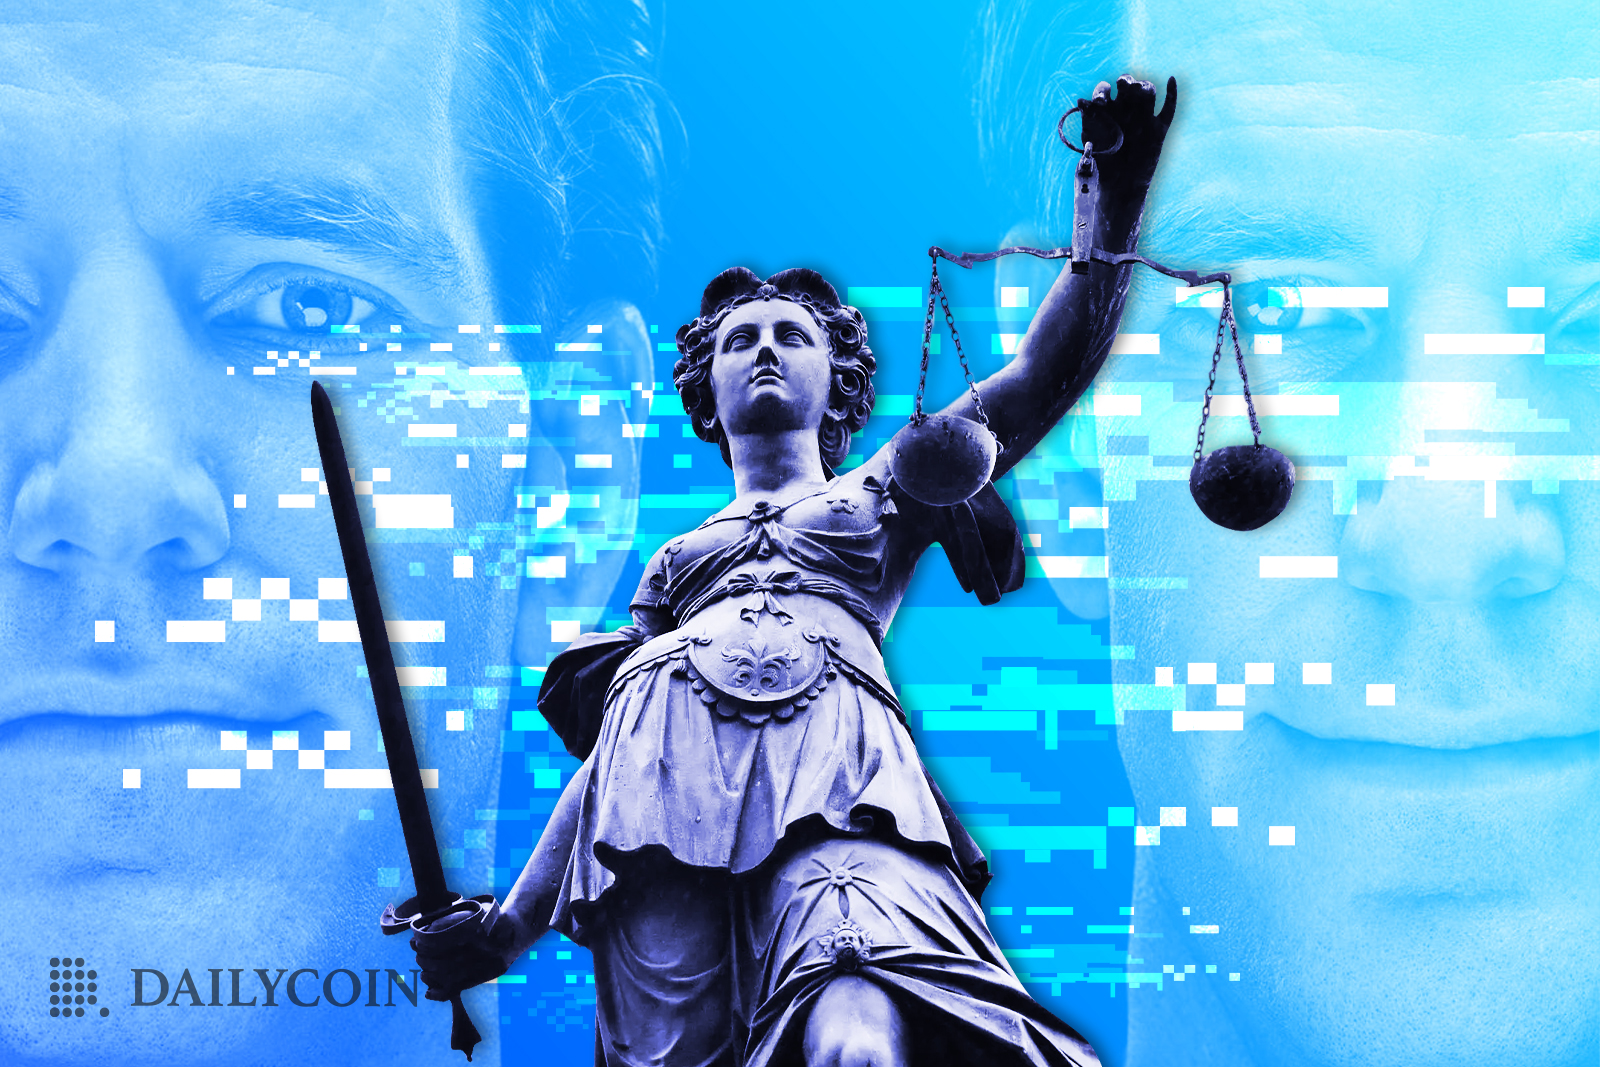 Lady Justice statue holding scales and sword.